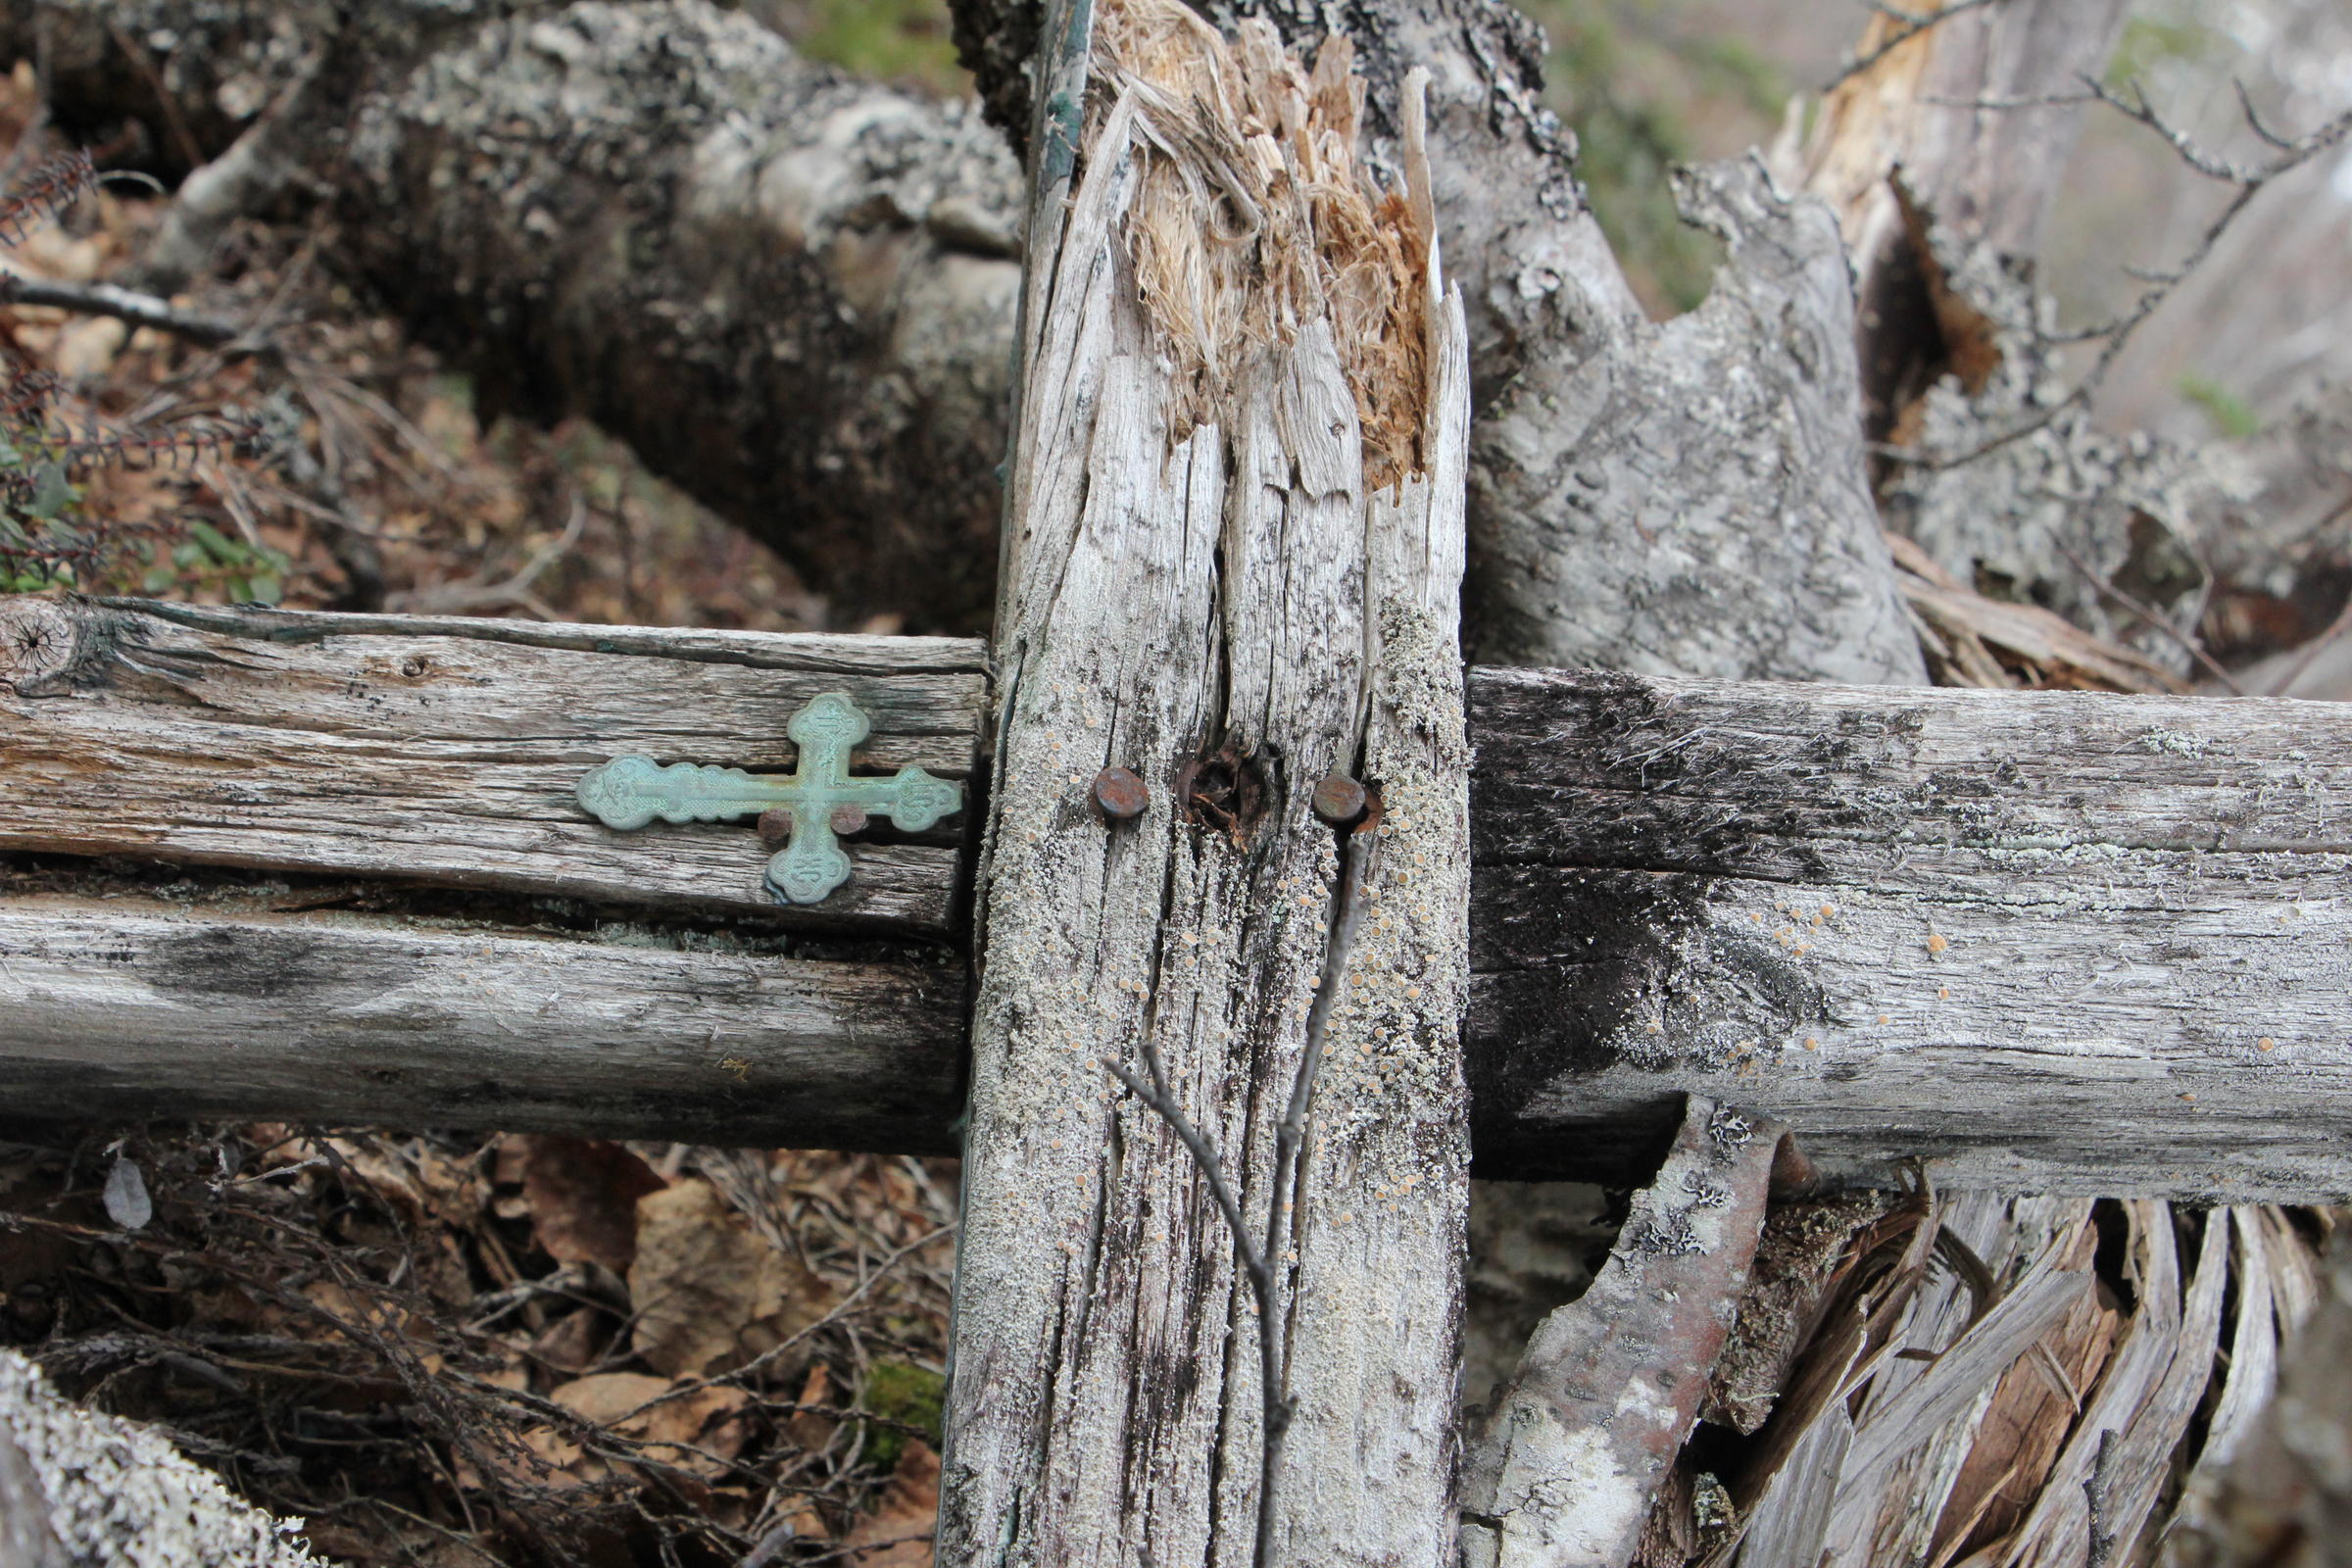 A cross that marked a grave at an abandoned Kvichak settlement. (Photo by Avery Lill/KDLG)